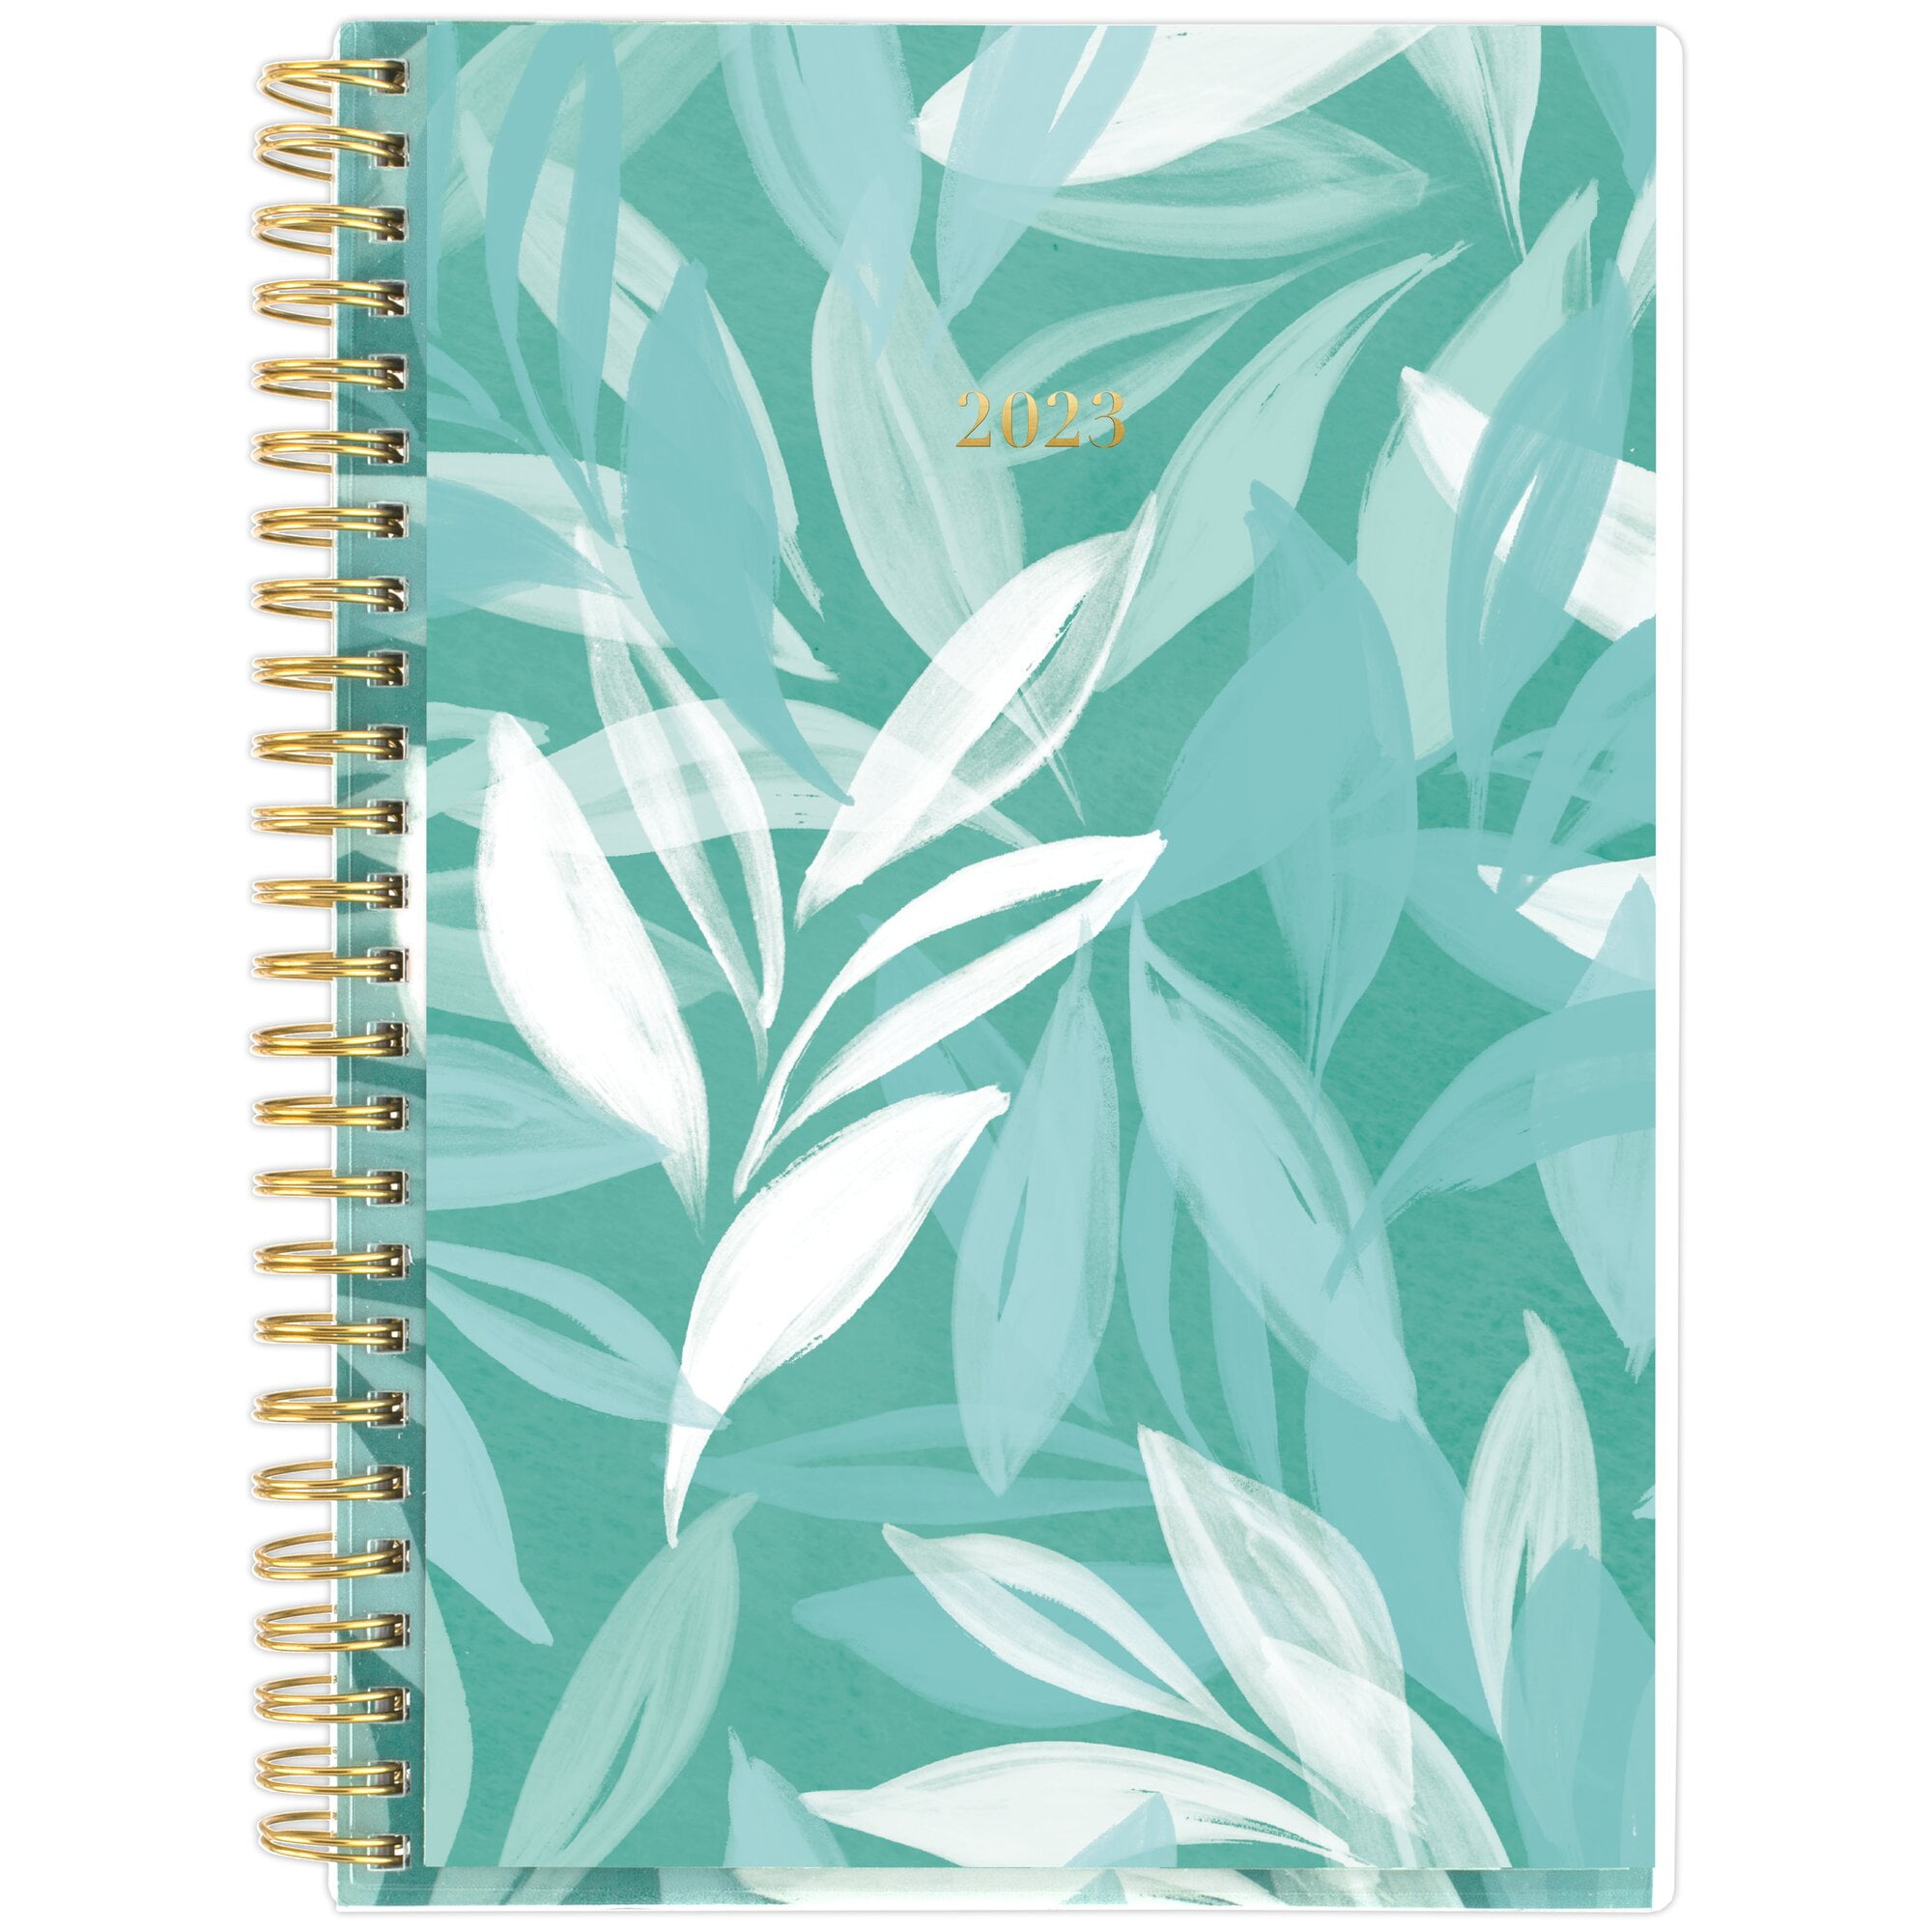 Casey 1566-200 Small 5-1/2 x 8-1/2 2022 Weekly & Monthly Planner by Cambridge 